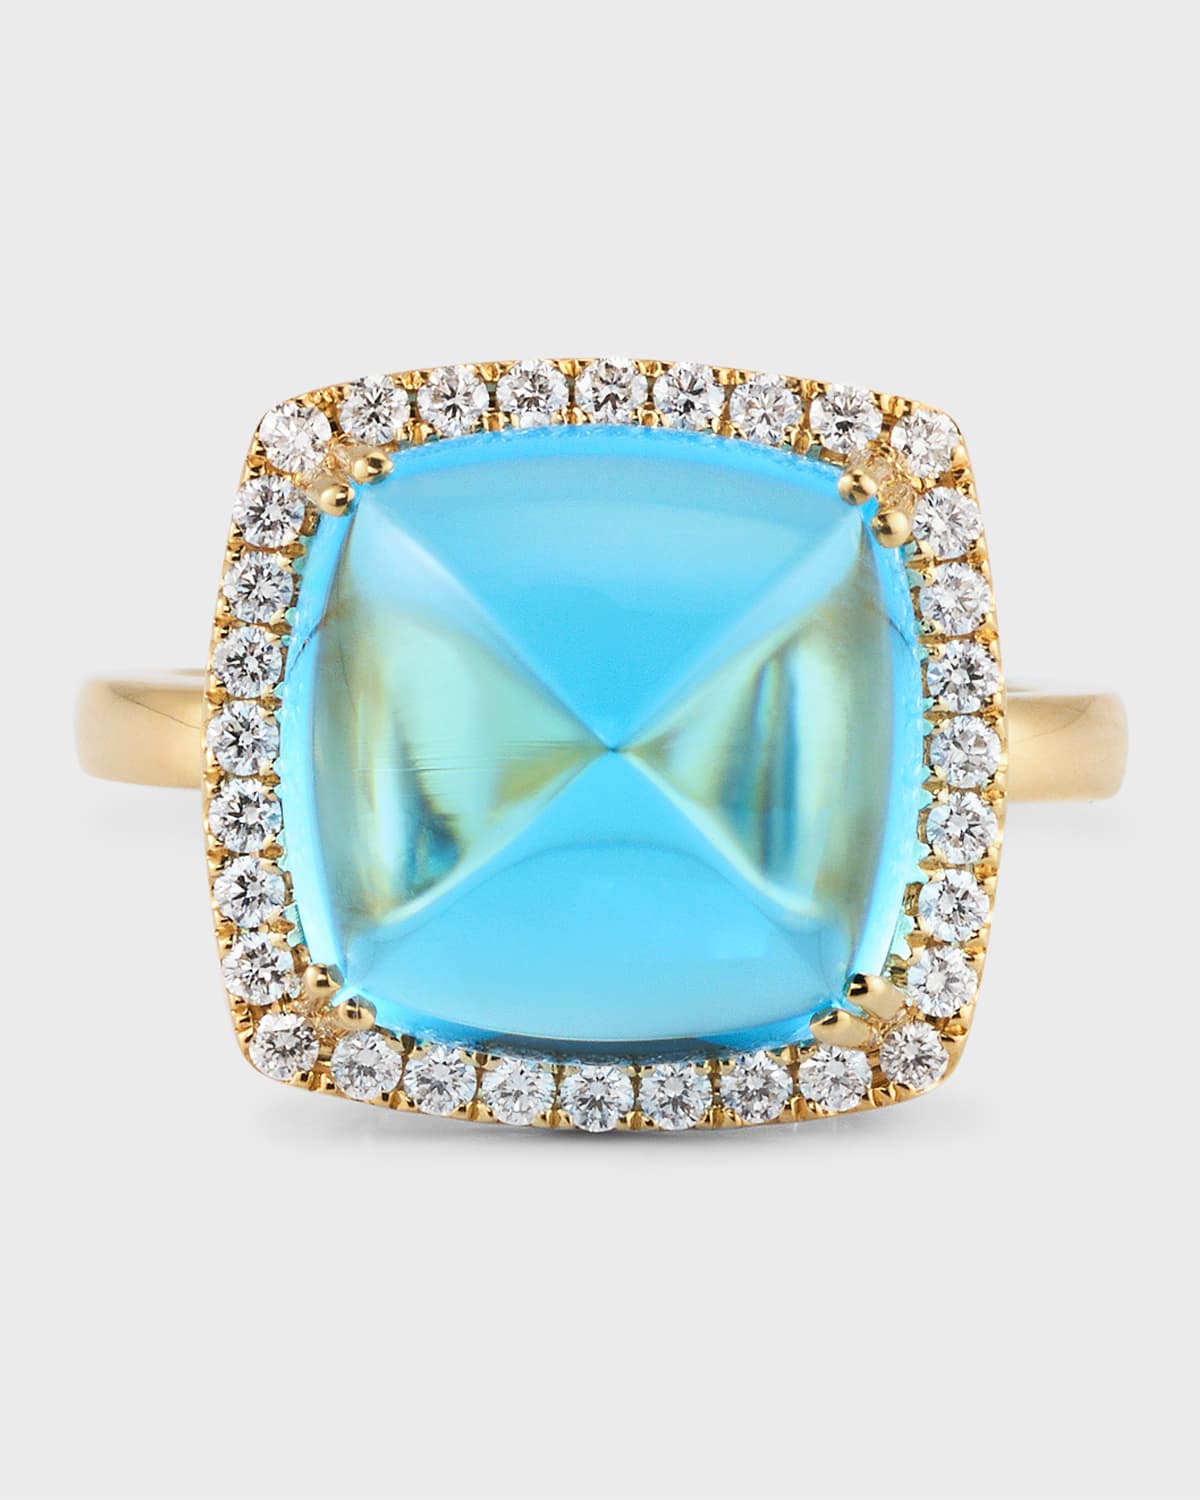 David Kord 18k Yellow Gold Ring With Swiss Blue Topaz And Diamonds